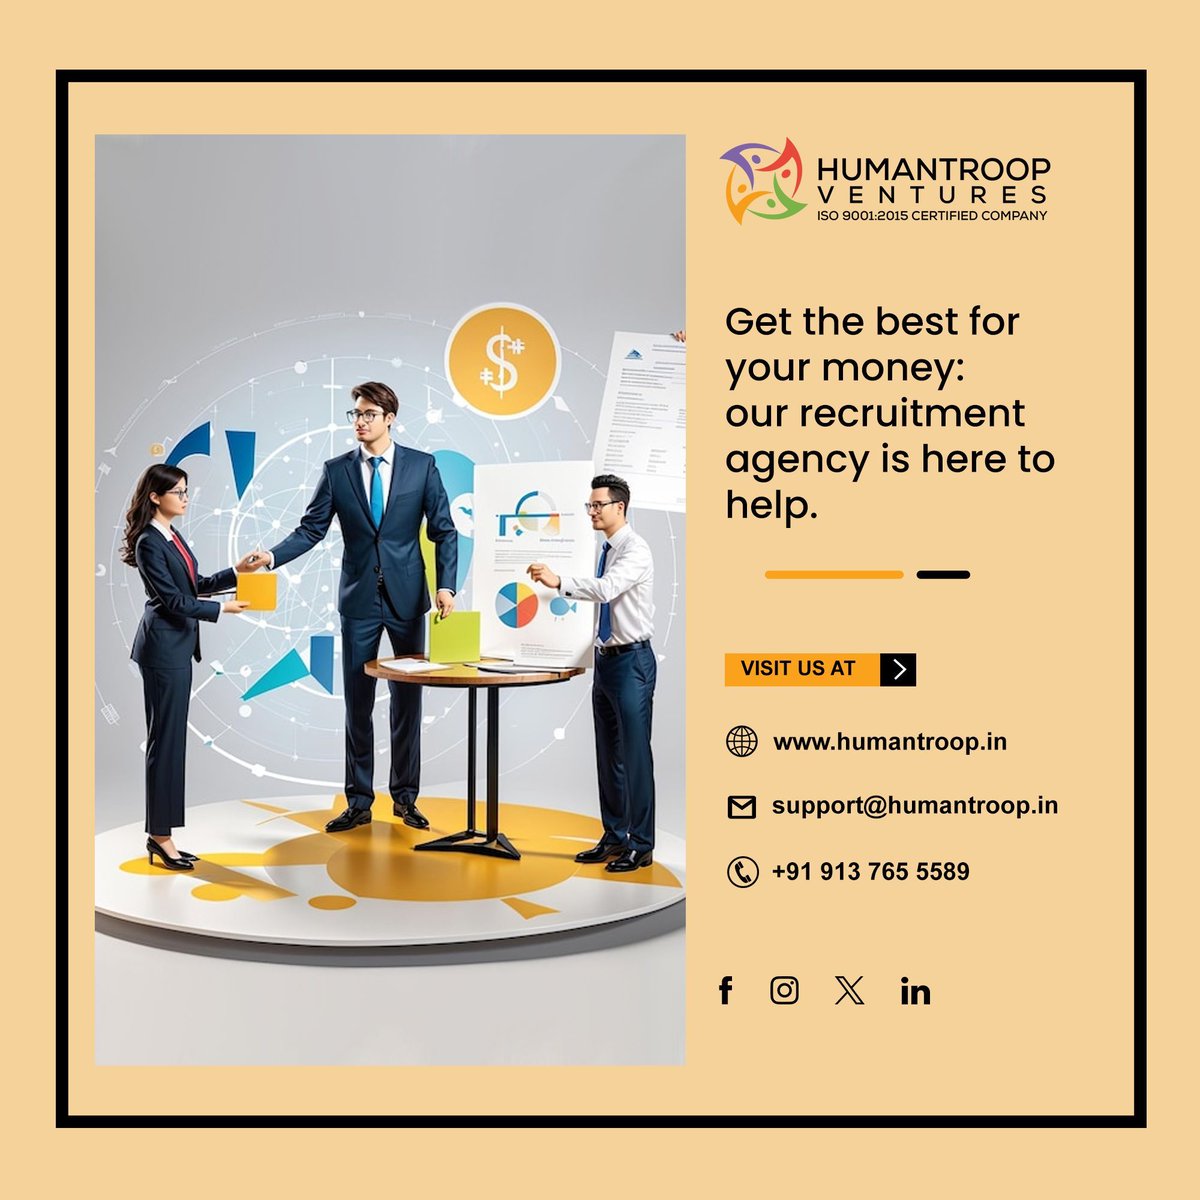 We help you meet potential employees who can take your company to new heights.. 
.
.
.
.
#humantroopventures #recruitment #hrrecruitment #jobsearch #hiring # hrconsultant #jobseeker #jobhunt #staffing